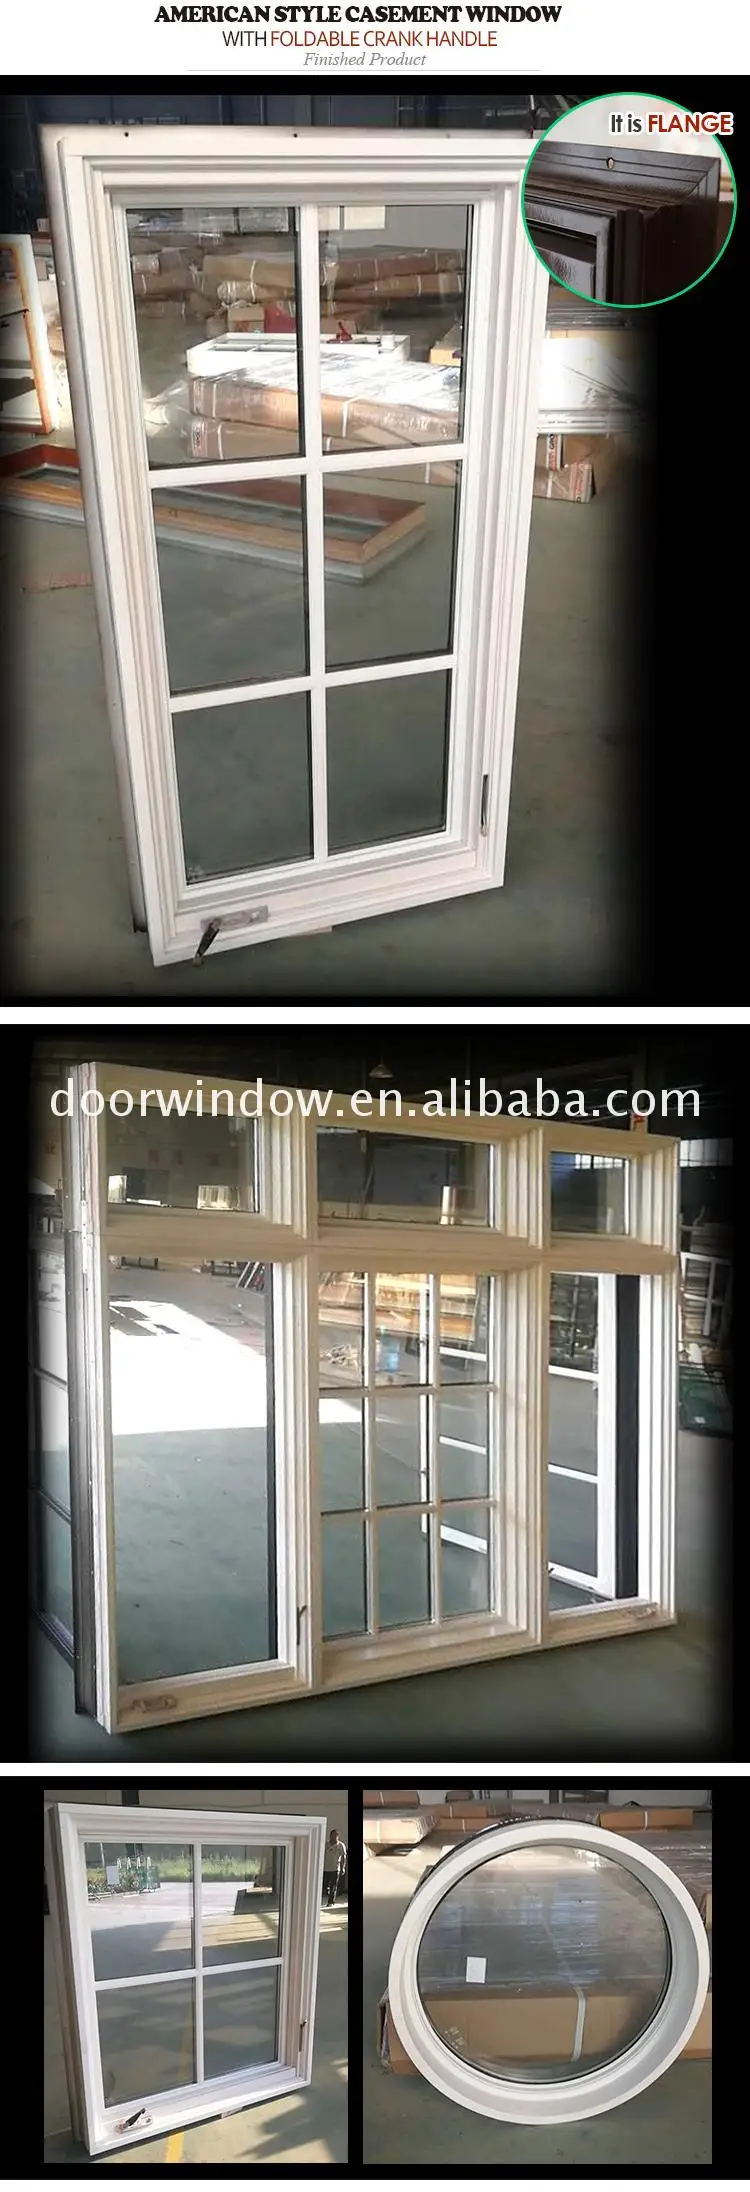 large round windows Hot sell large round windows for sale picture window laminated glass non-thermal break